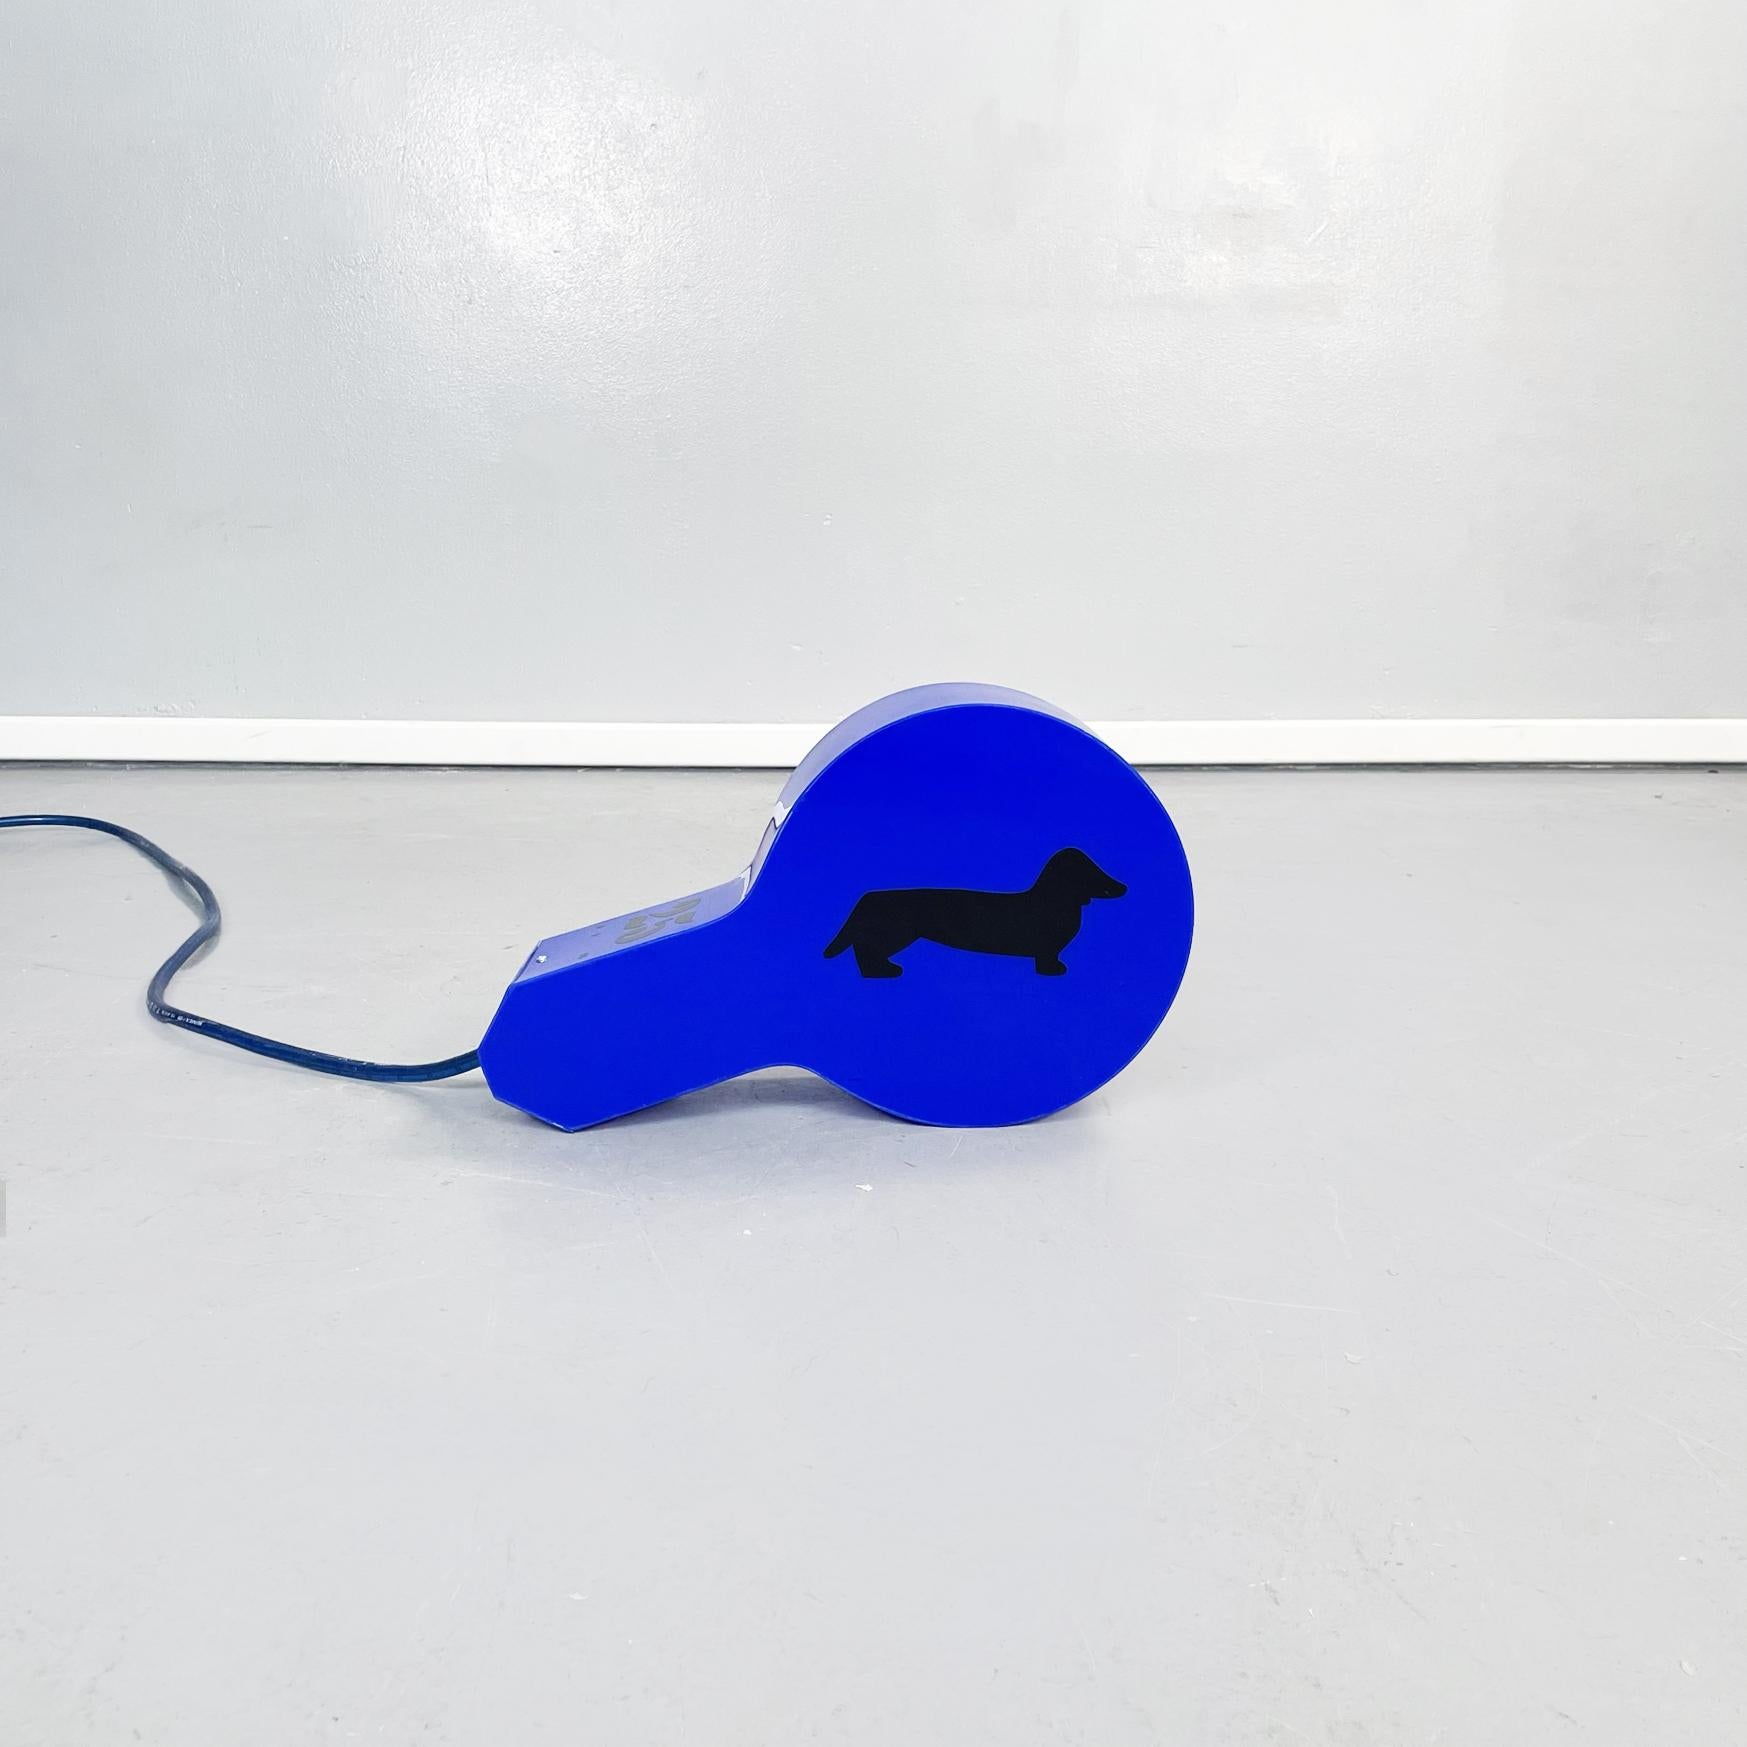 Italian post-modern Whistle-shaped led table lamp in blue plexiglass by Marco Lodola, 2000s
Fantastic and impressive whistle-shaped led table lamp in bright blue plexiglass with a dachshund dog.
There are on the side a silhouette in black of a